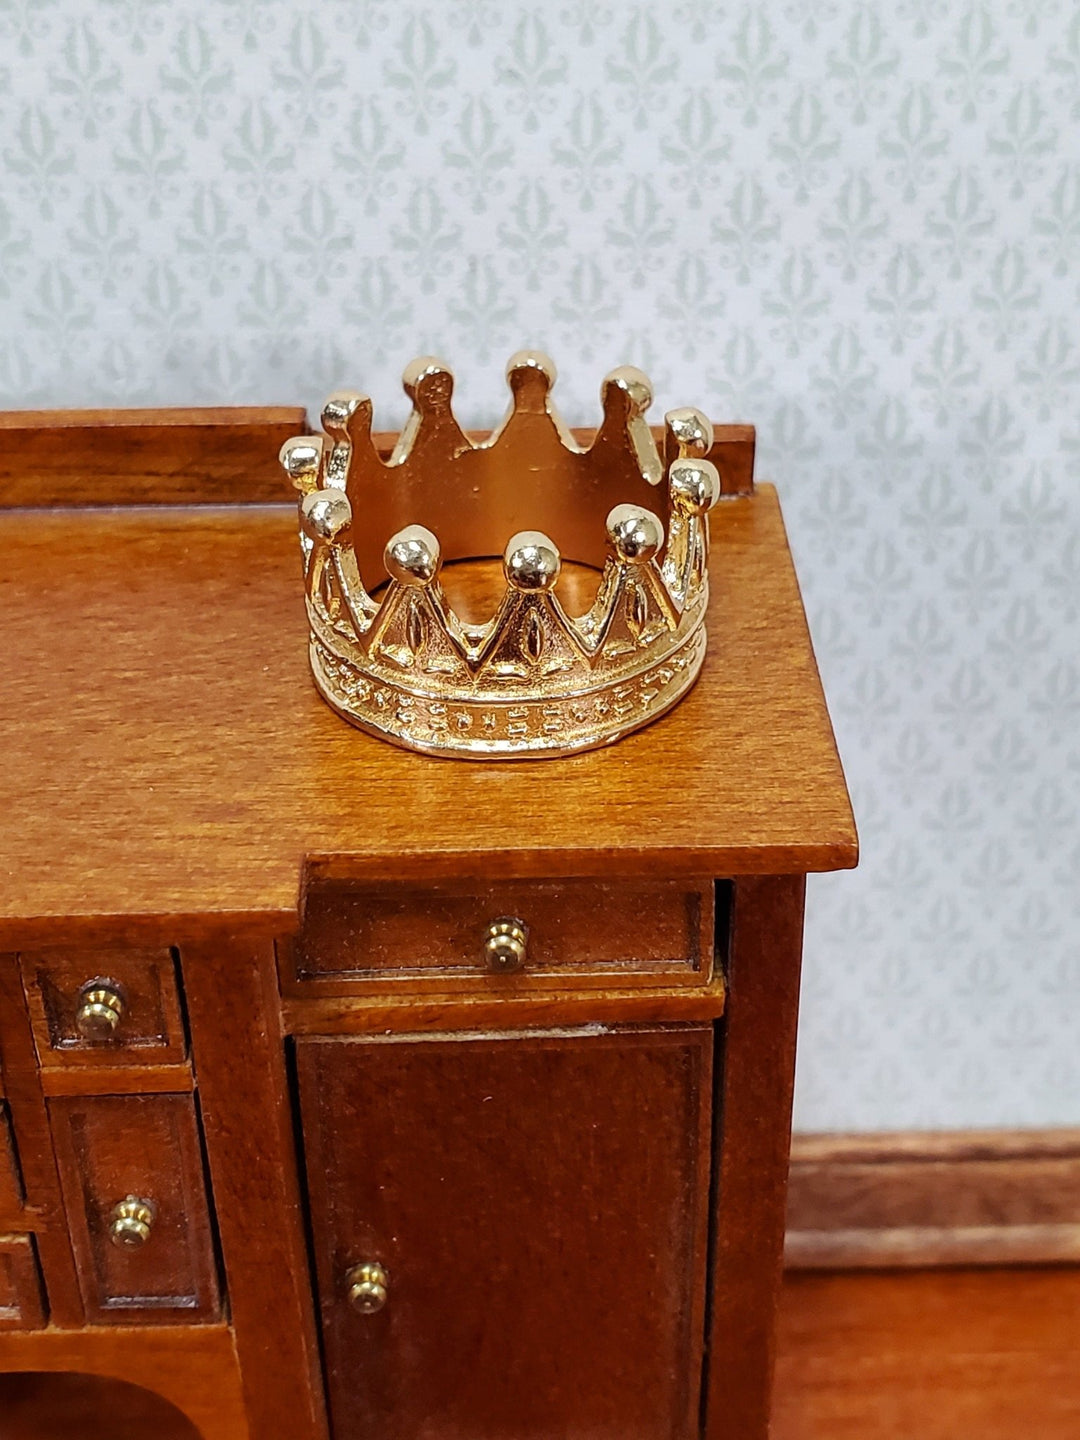 Tiny Miniature Crown Gold Metal for Dolls Dollhouse Works with 1:12 Scale Accessory - Miniature Crush